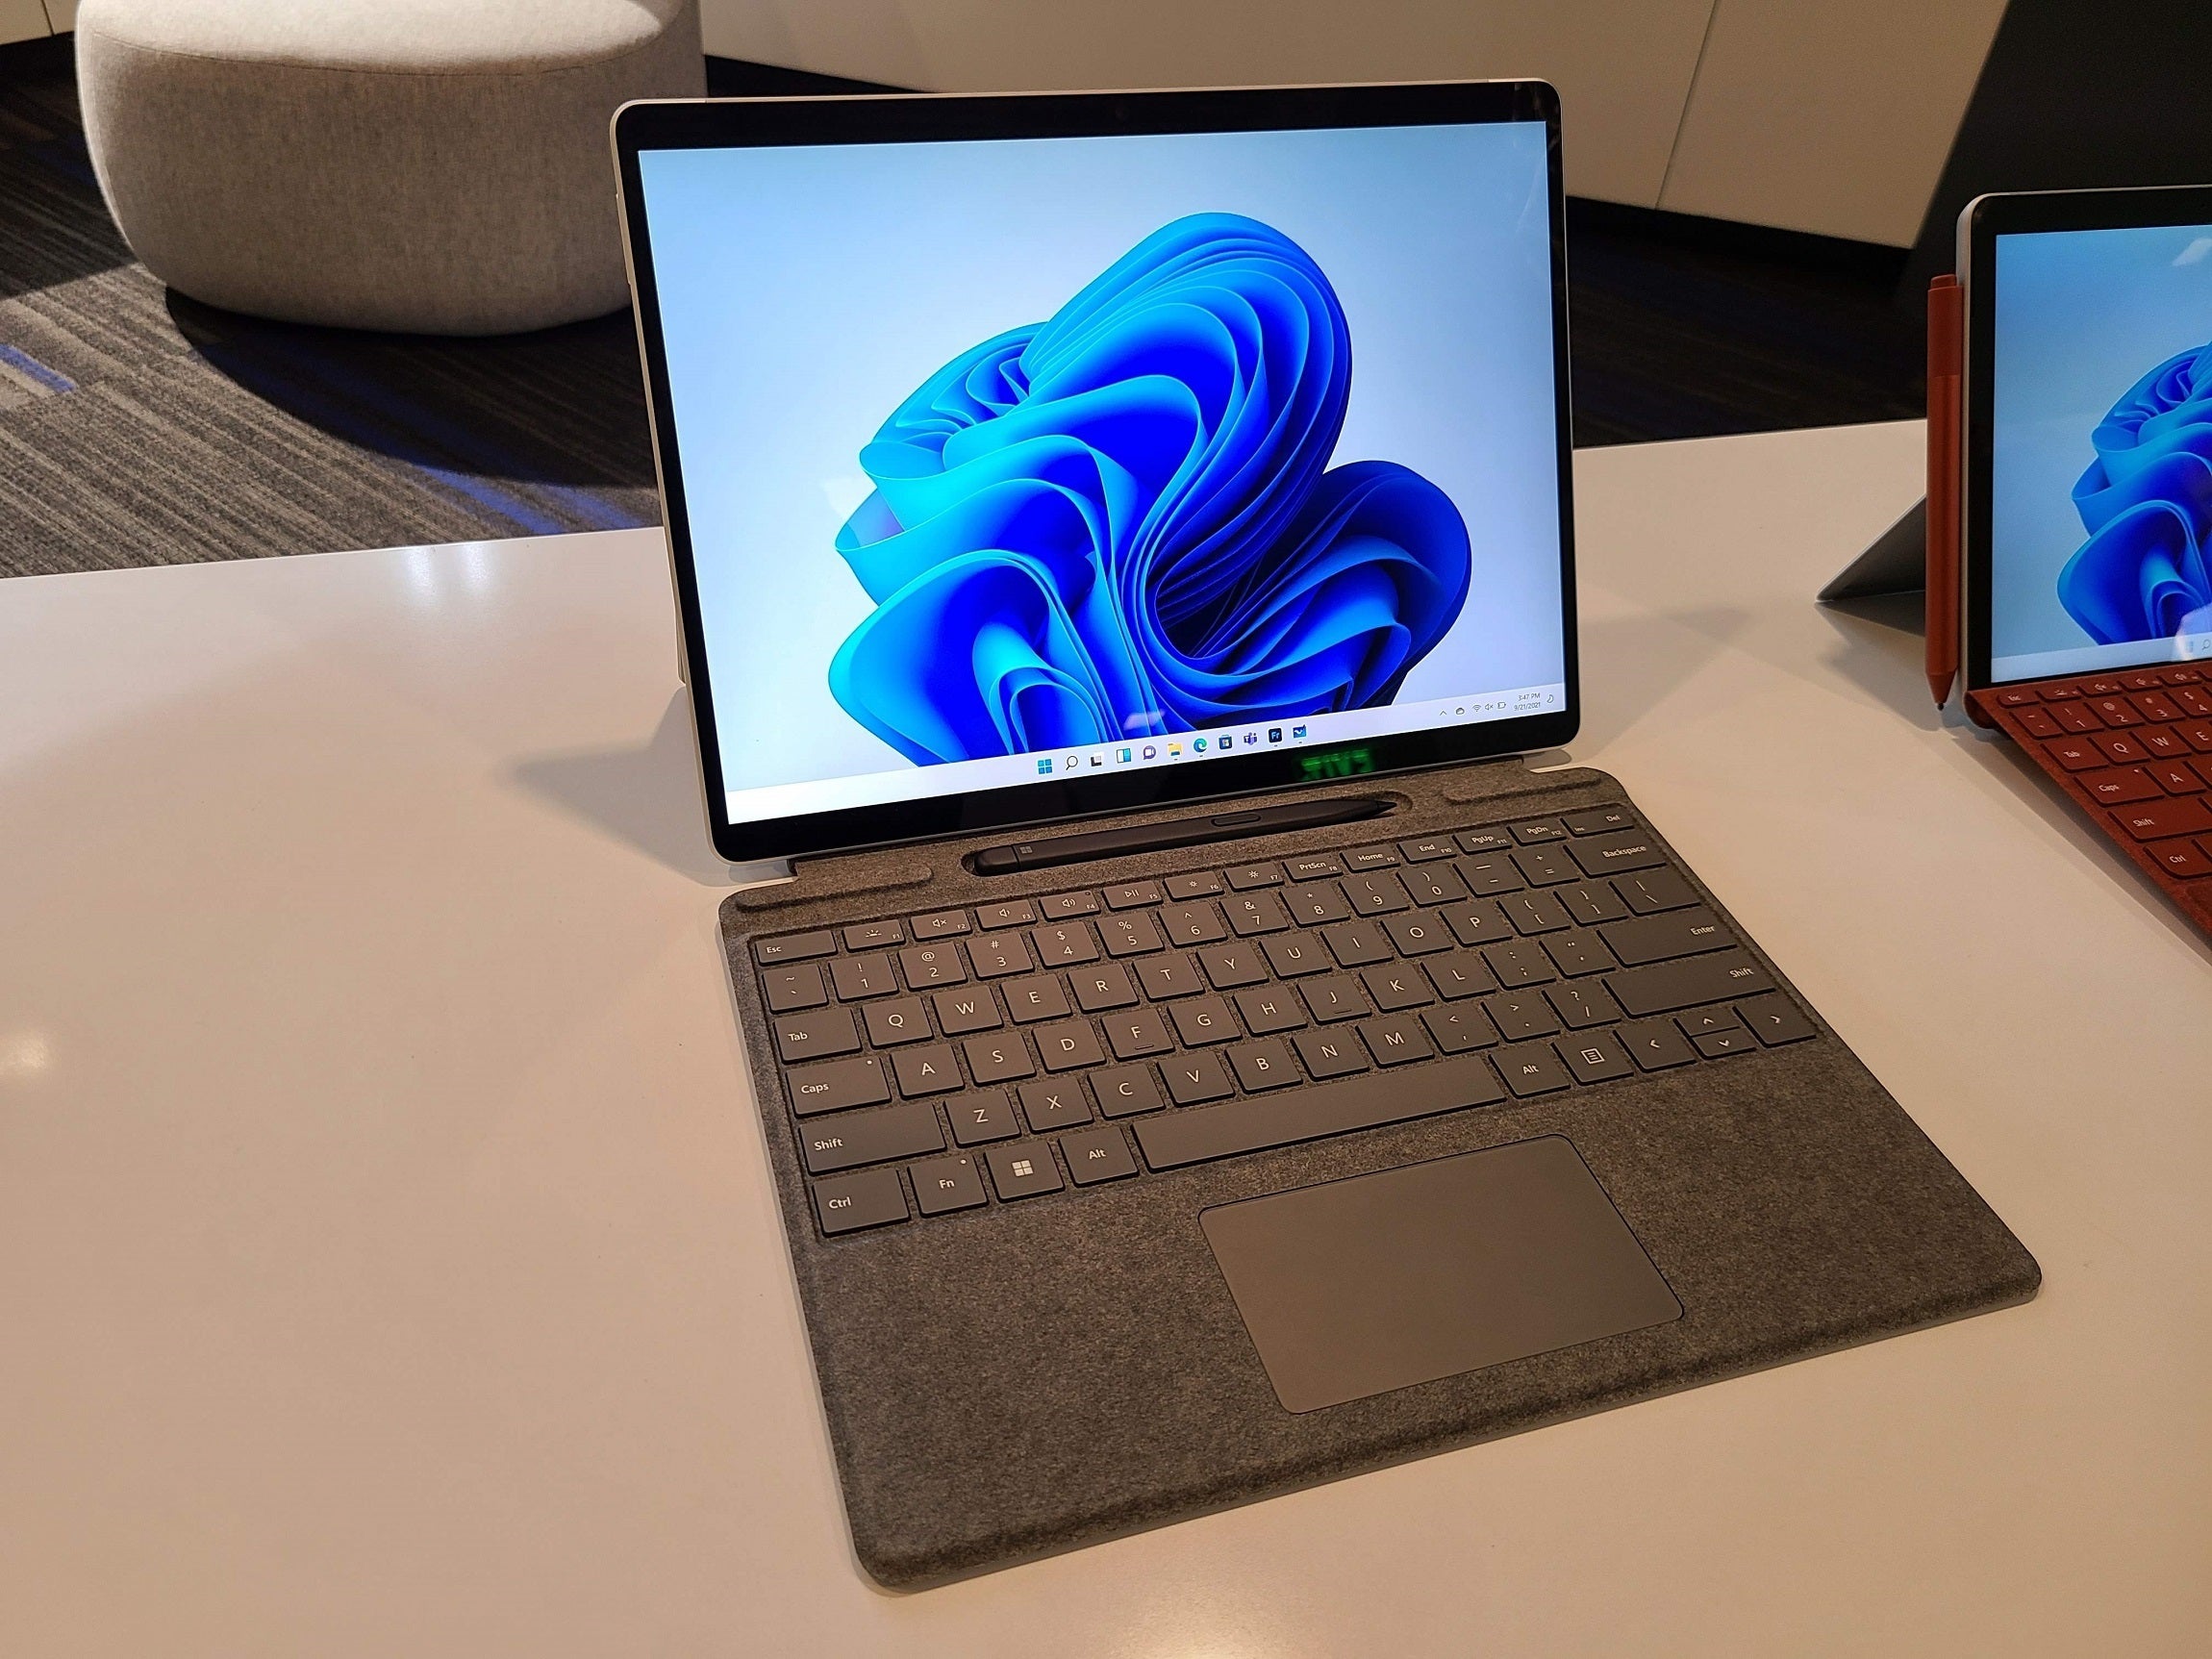 Microsoft's redesigned Surface Pro 8 sets the new bar for Windows